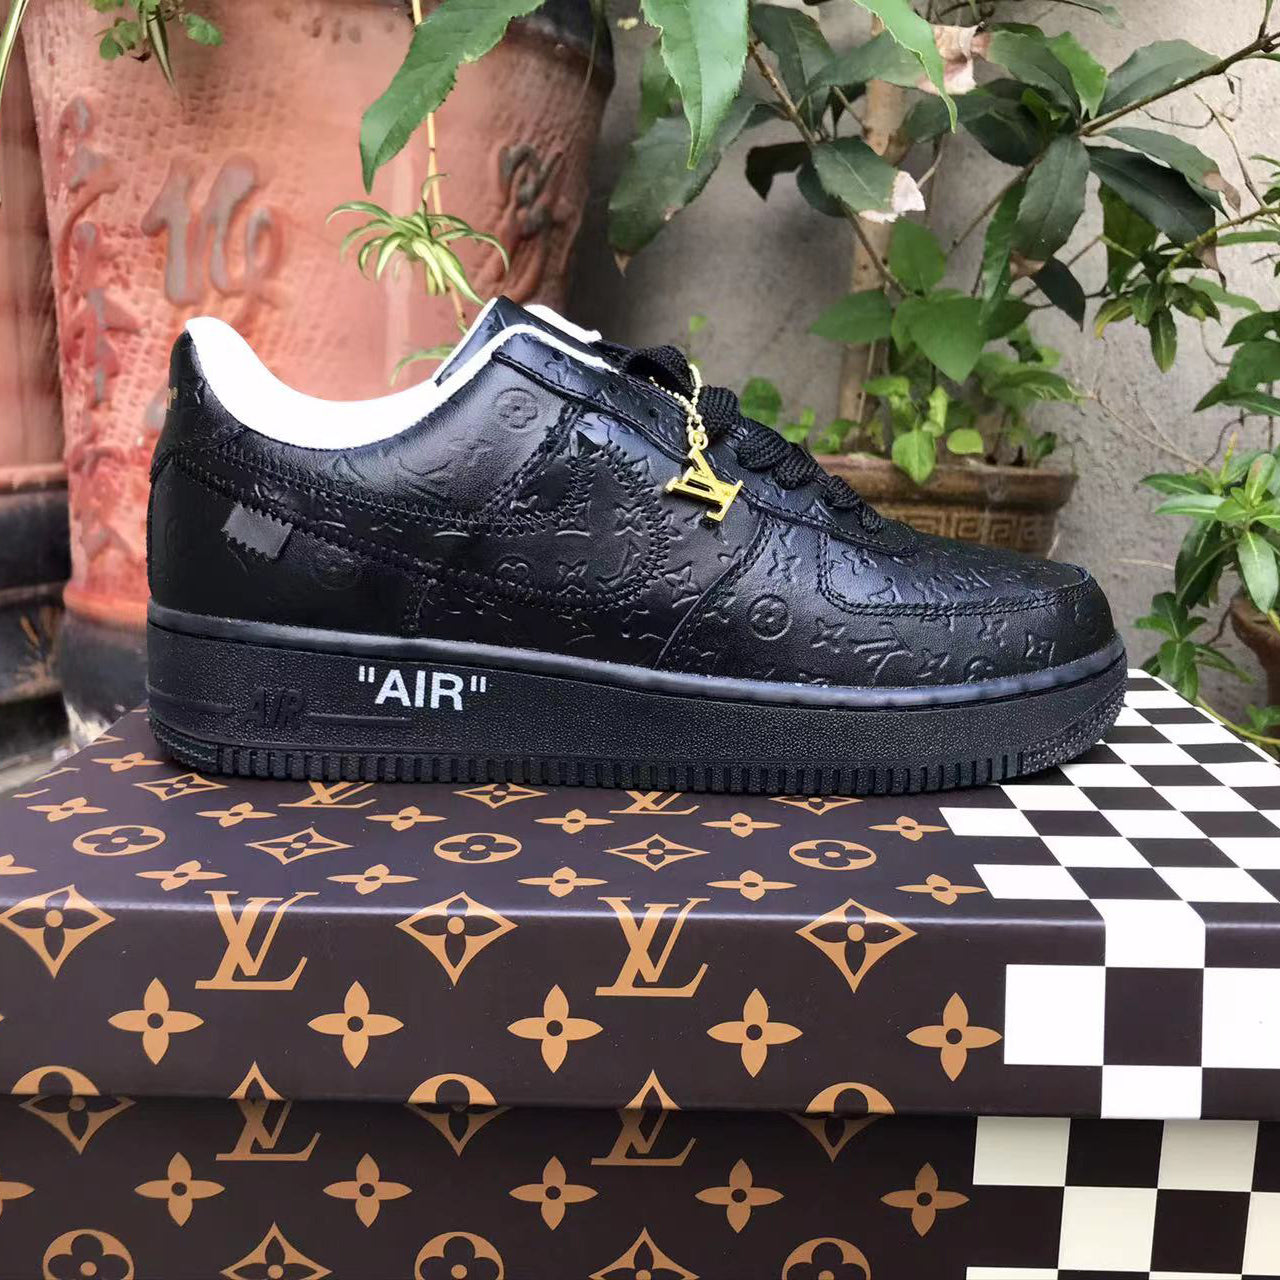 Louis Vuitton x Nike Air Force 1 Low LV Sneakers Shoes